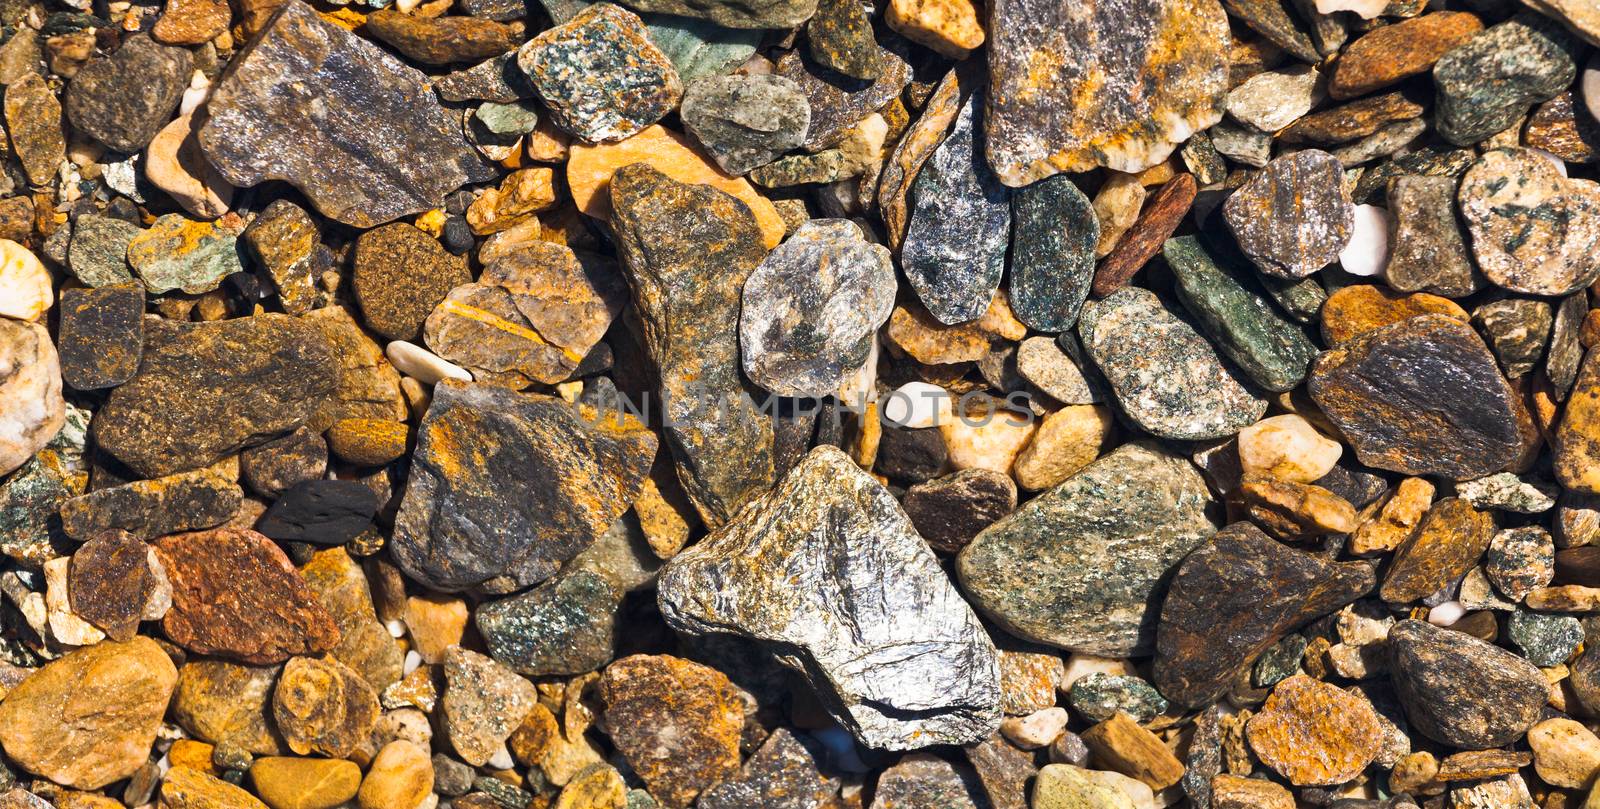 Deposit of rough shiny gravel nrown and grey as a geology nature background texture pattern